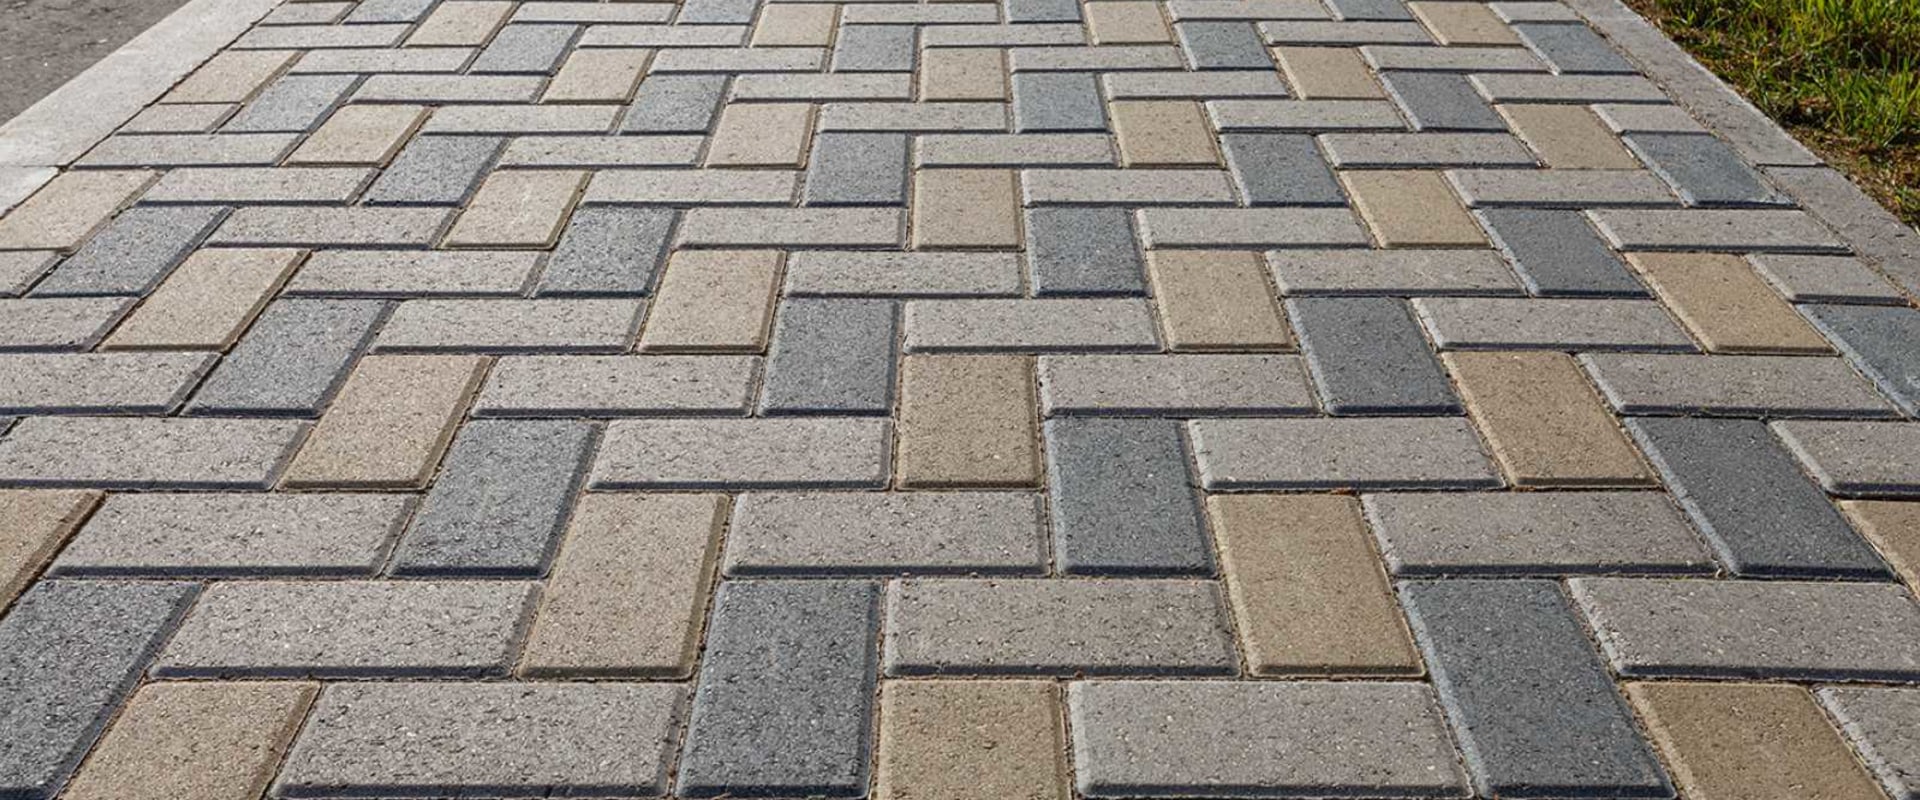 Repairing Pavers with Polyurethane Sealant: A Comprehensive Guide